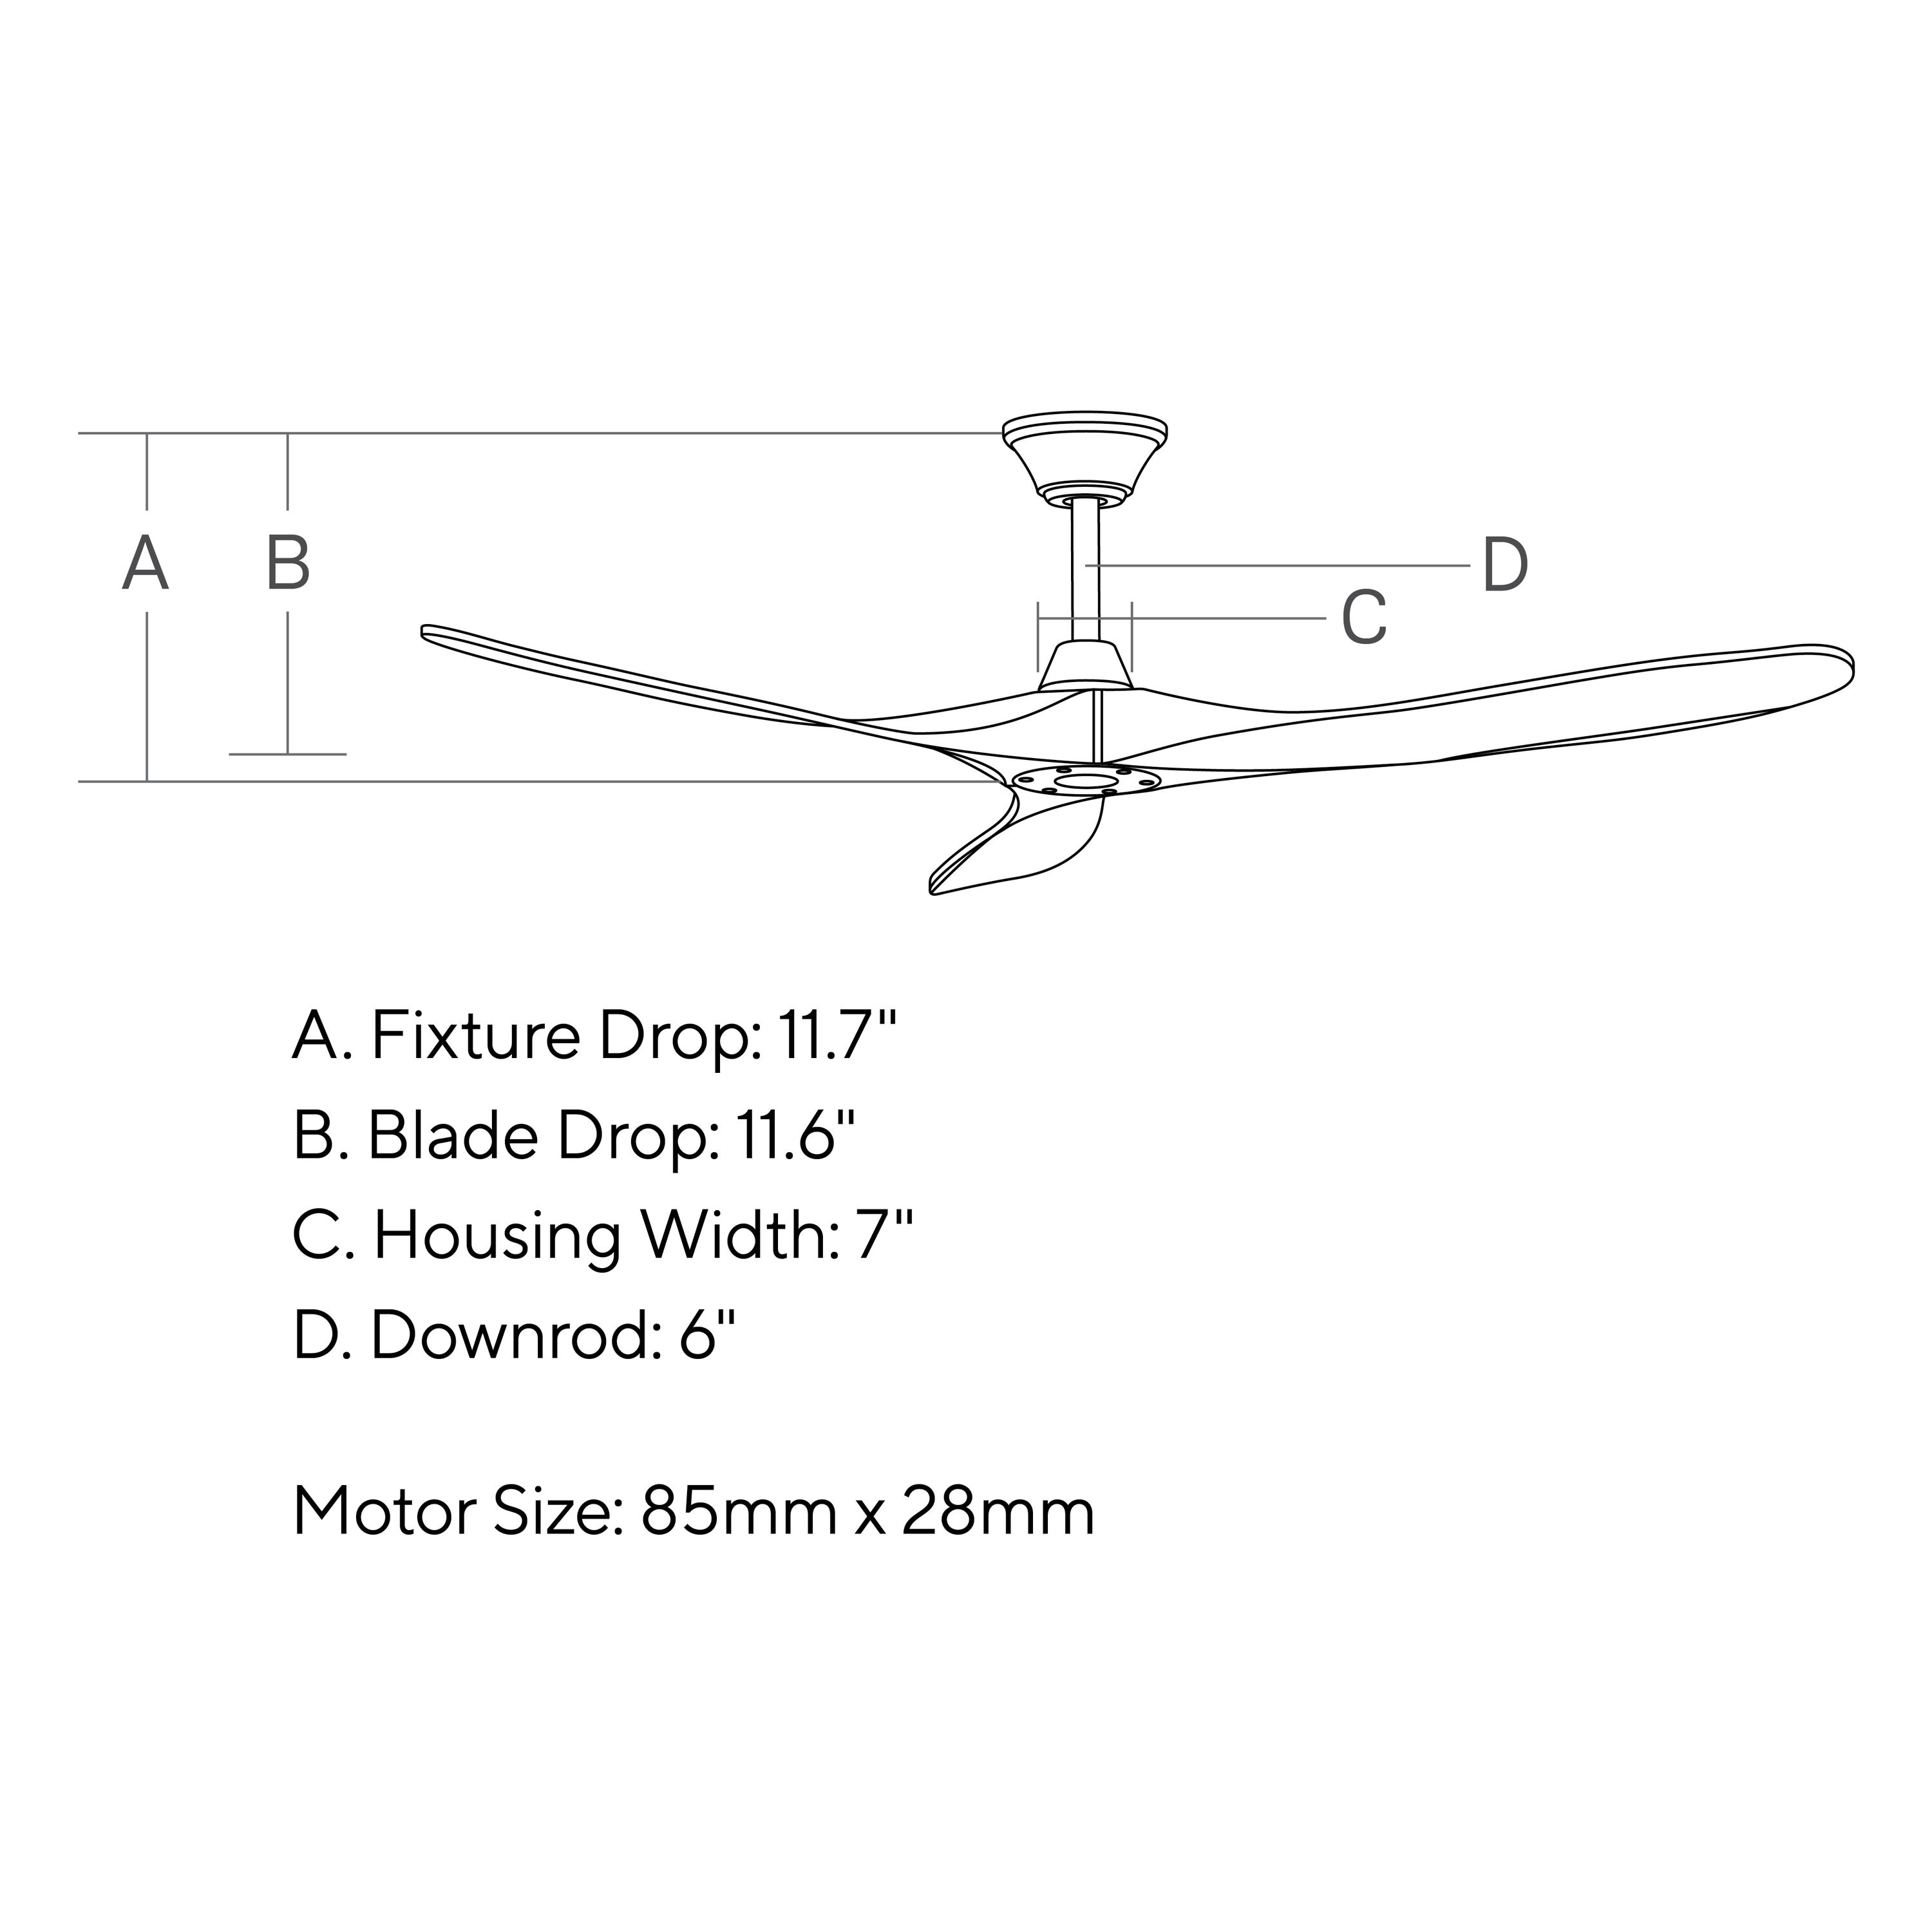 Generation Lighting Maverick 60-in Matte Black with Dark Walnut Blades  Indoor/Outdoor Propeller Ceiling Fan with Remote (3-Blade) in the Ceiling  Fans department at